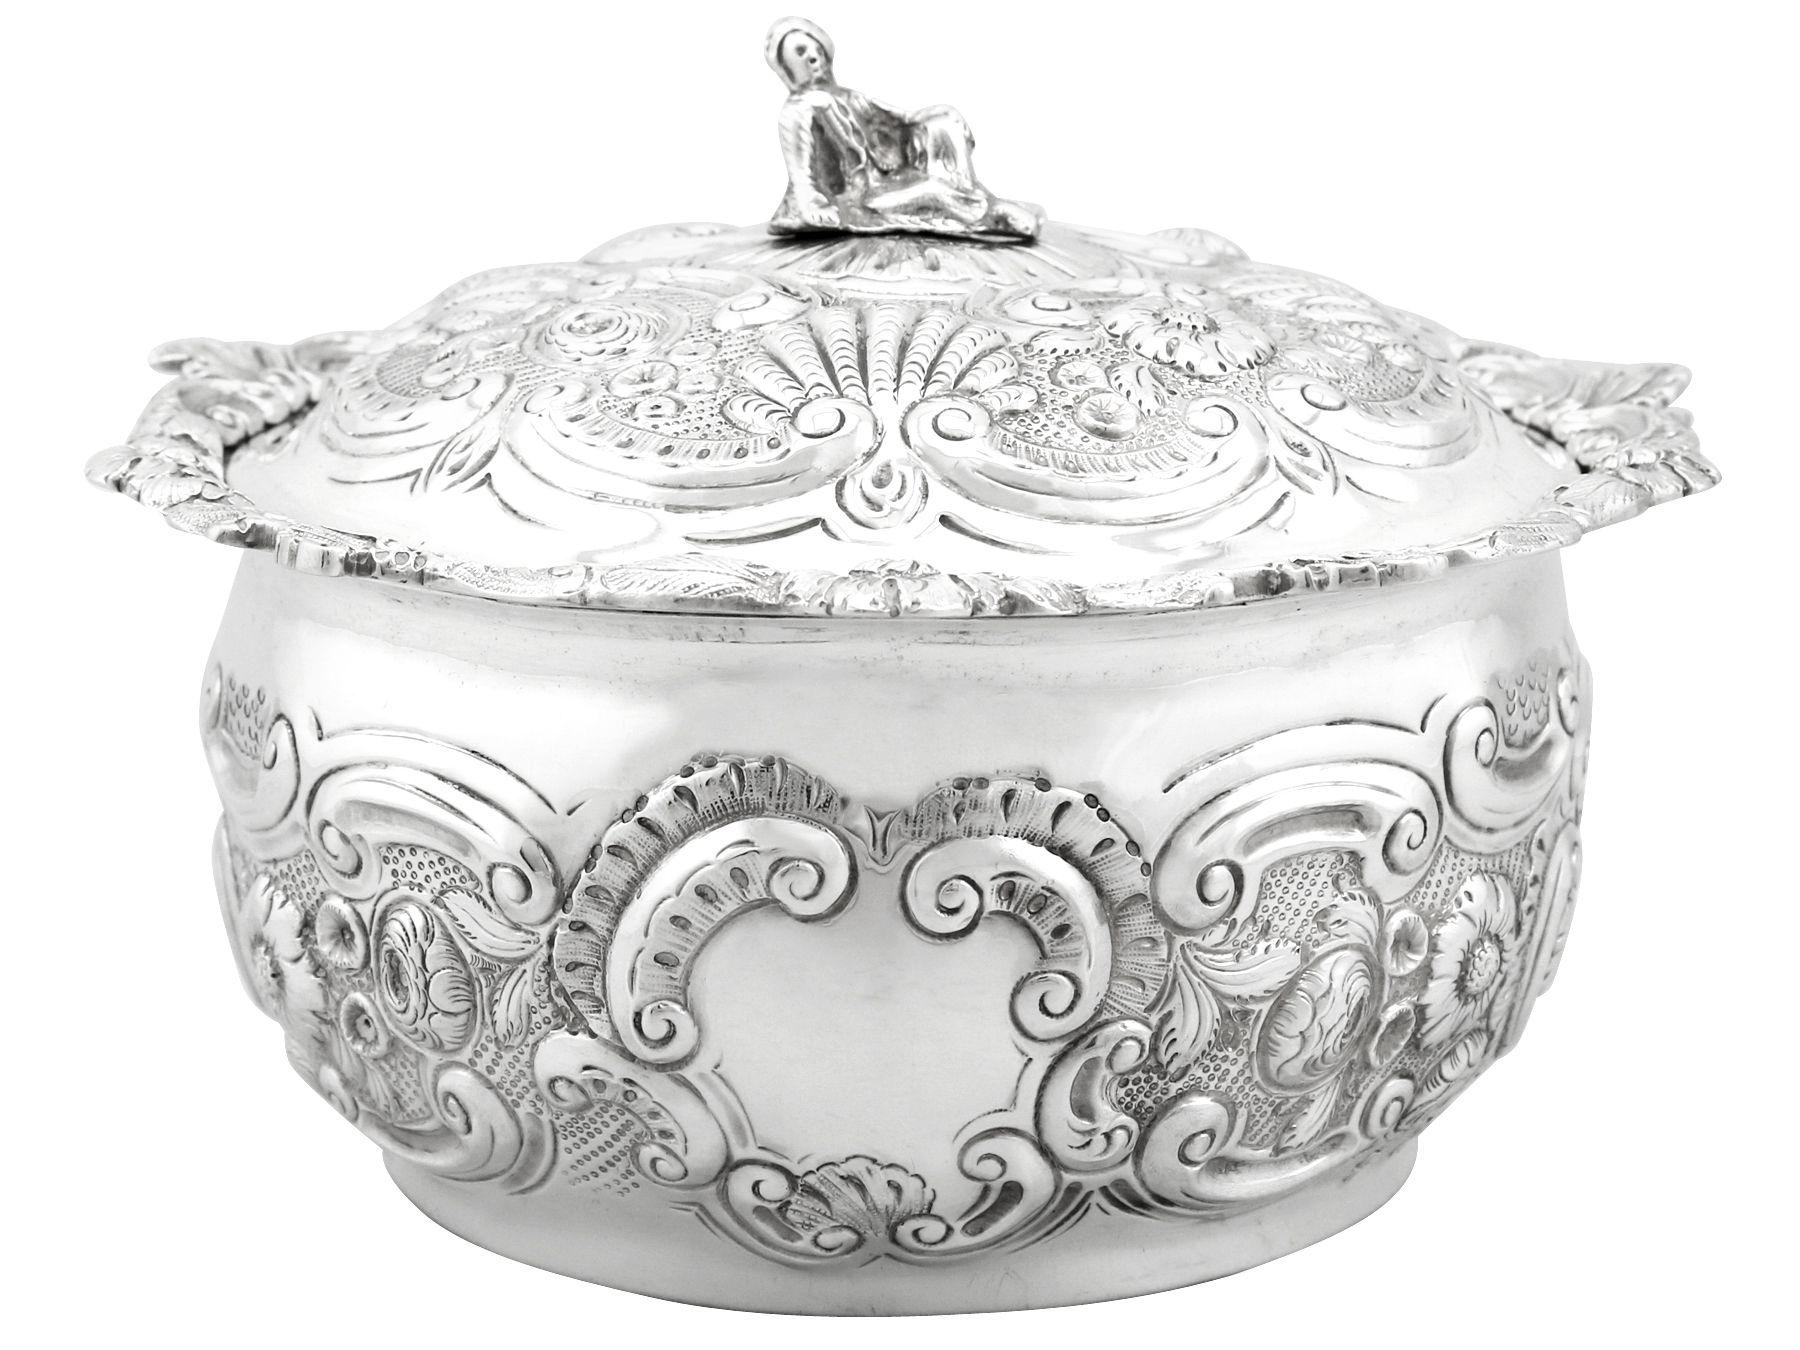 An exceptional, fine and impressive, large antique Georgian English sterling silver covered serving dish; an addition to our silver dining collection. 

This magnificent antique George III sterling silver serving dish has a circular rounded form